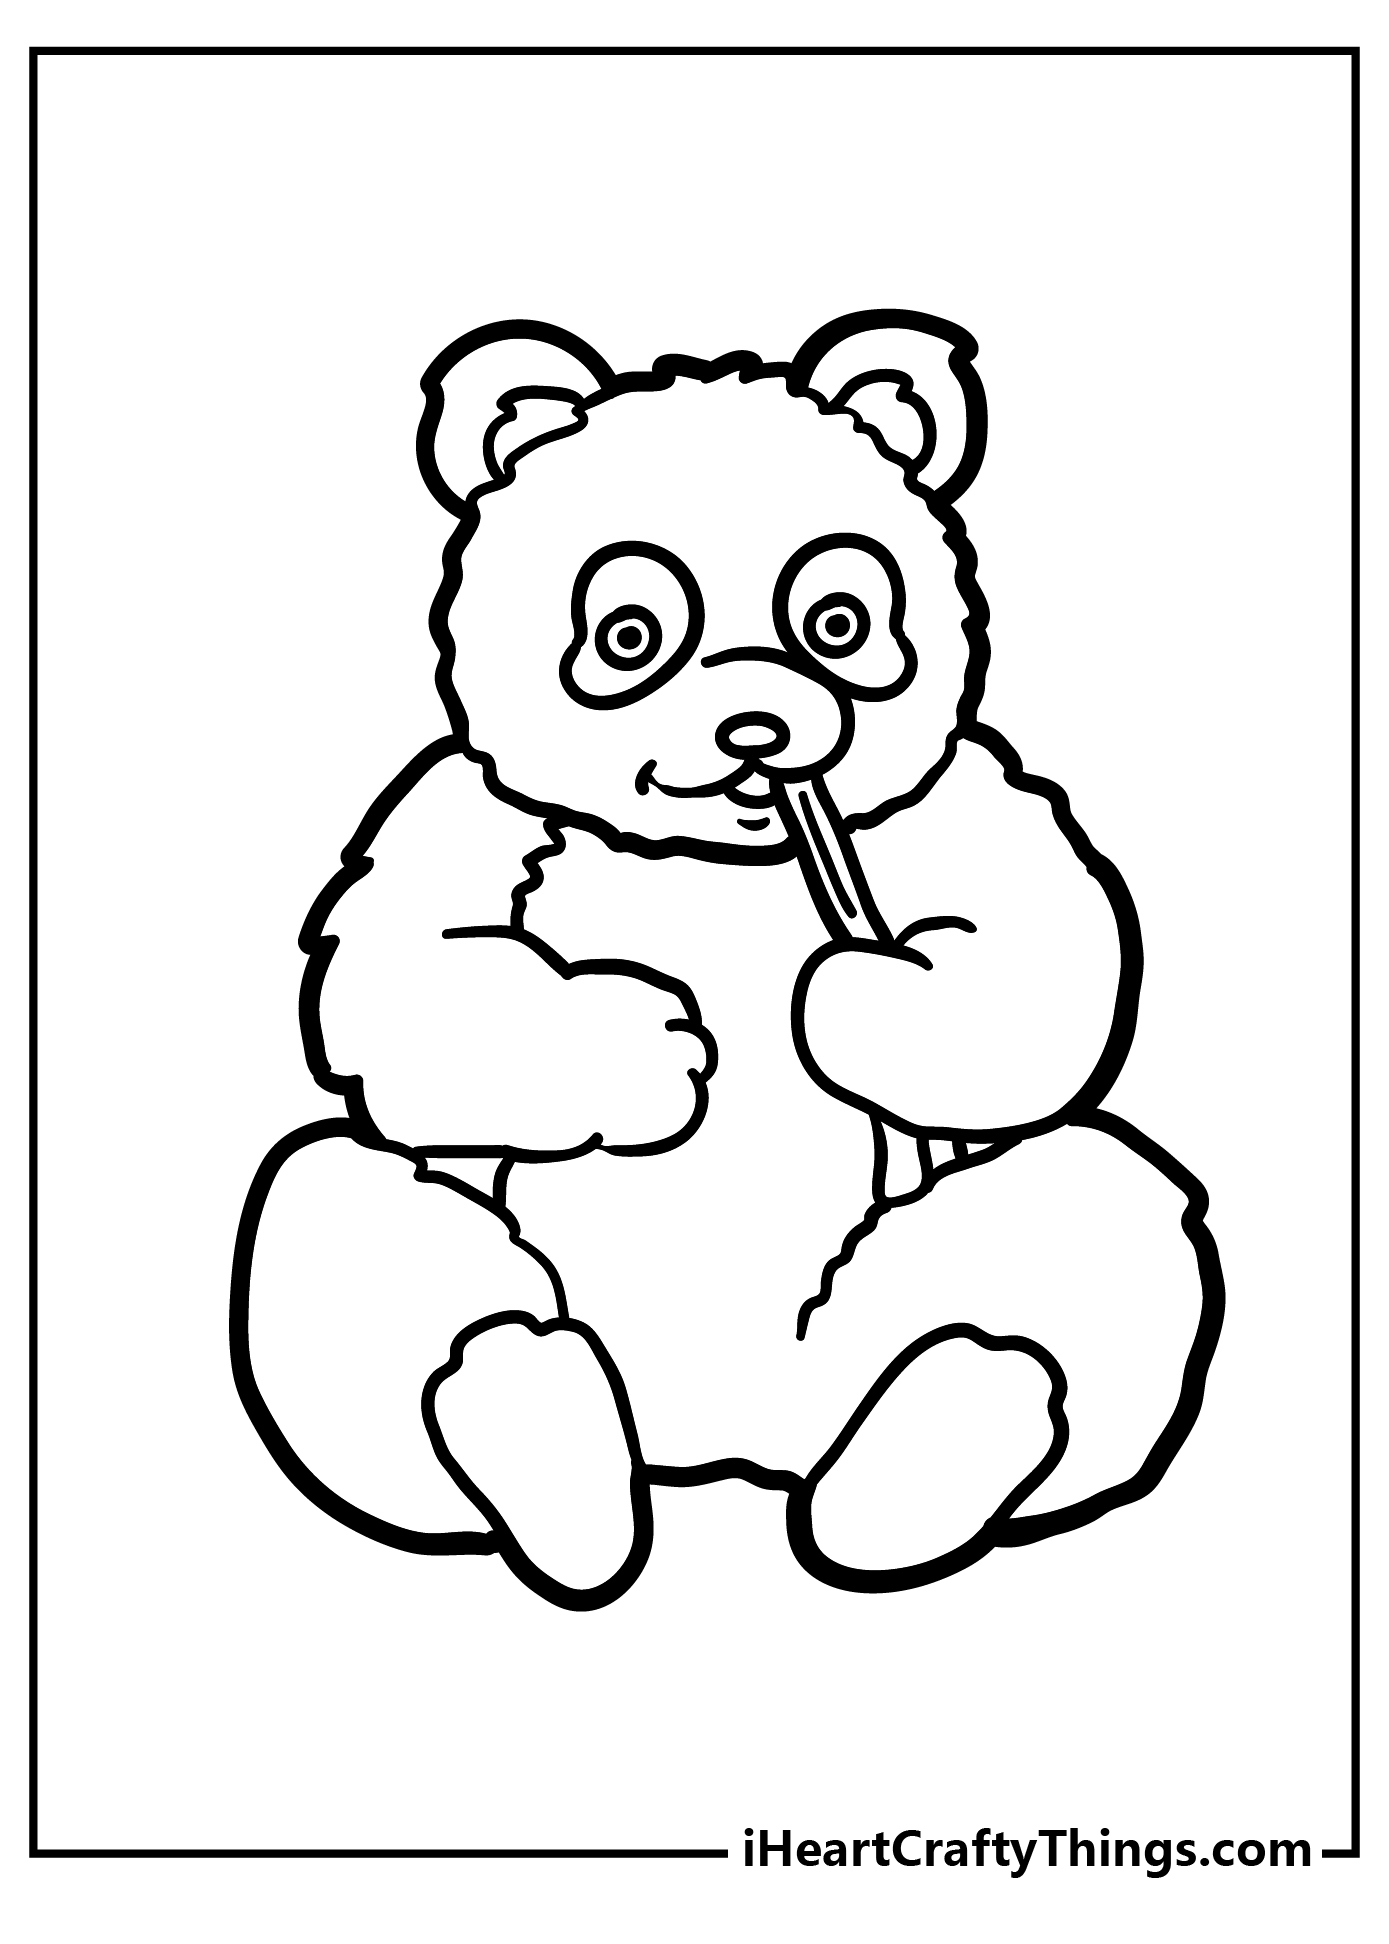 Panda Coloring Pages for preschoolers free printable